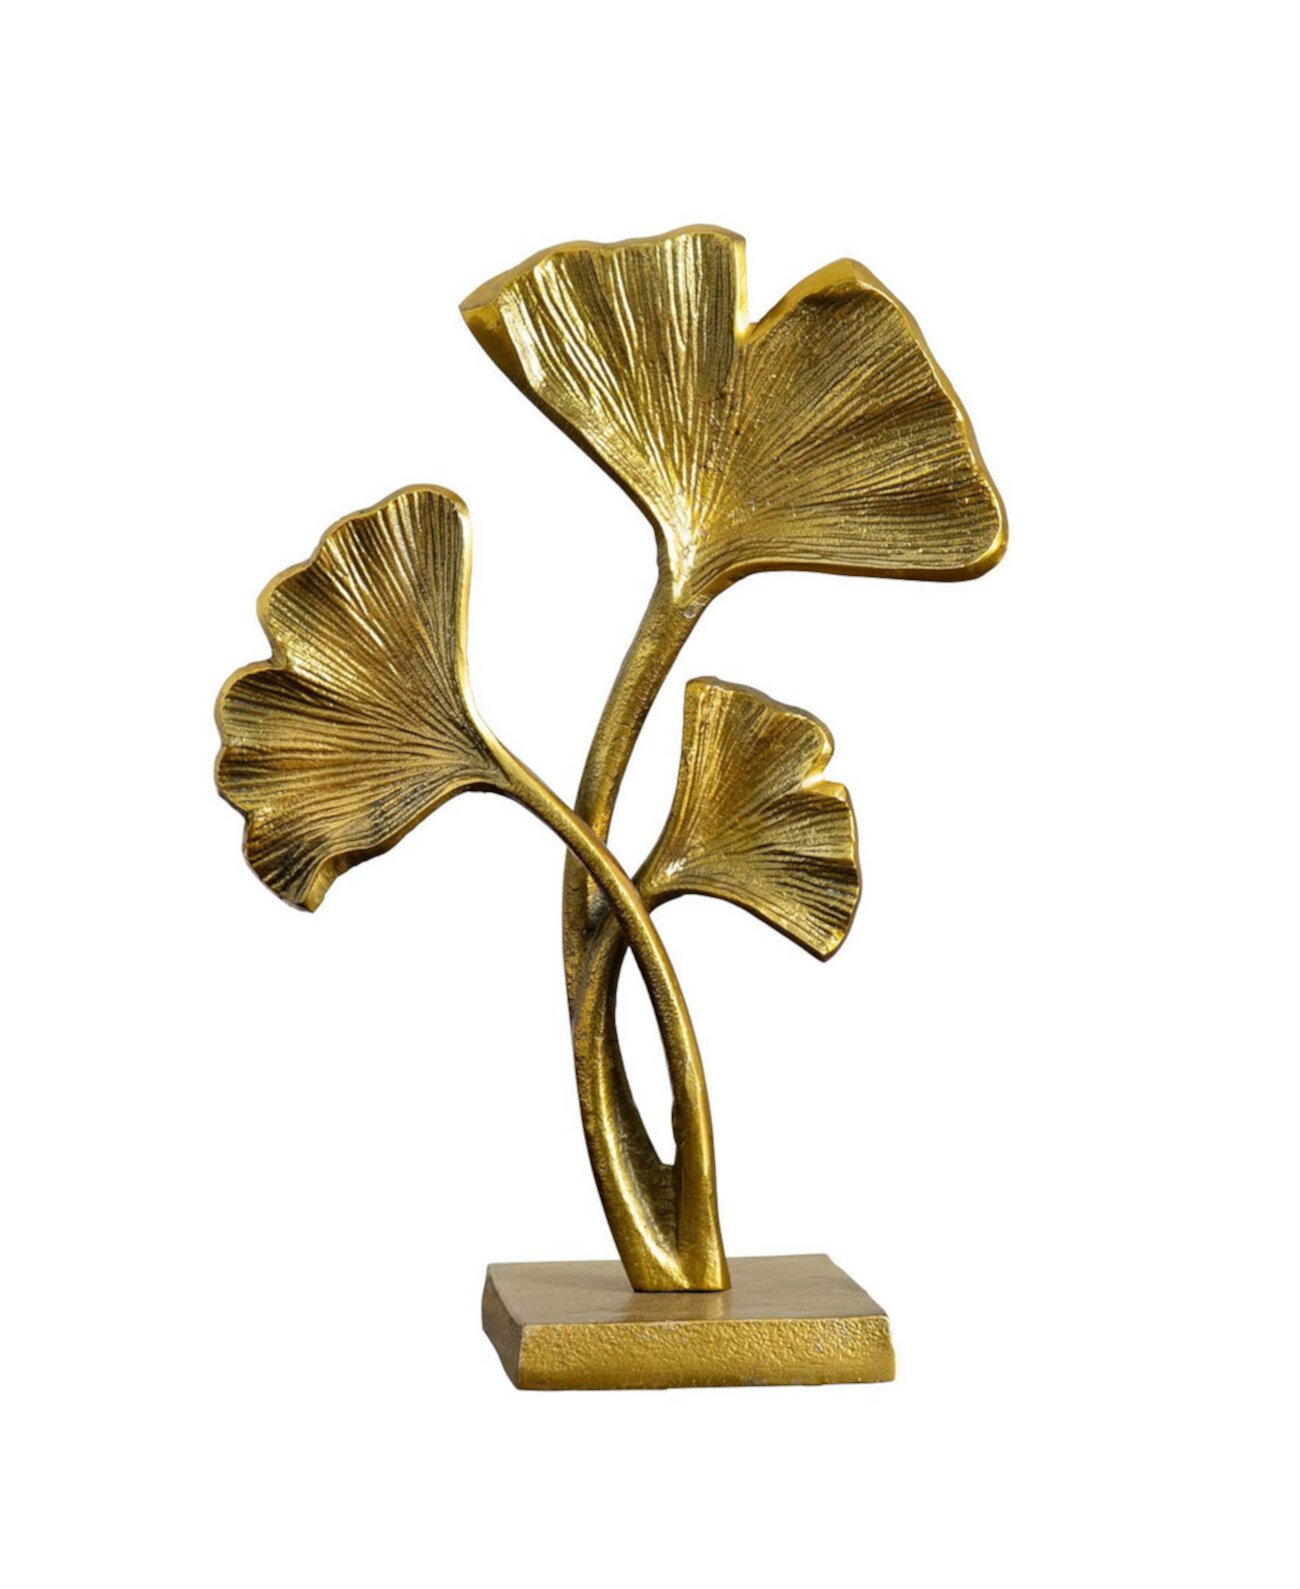 15in. Gold Leaf Sculpture Decorative Accent NEARLY NATURAL